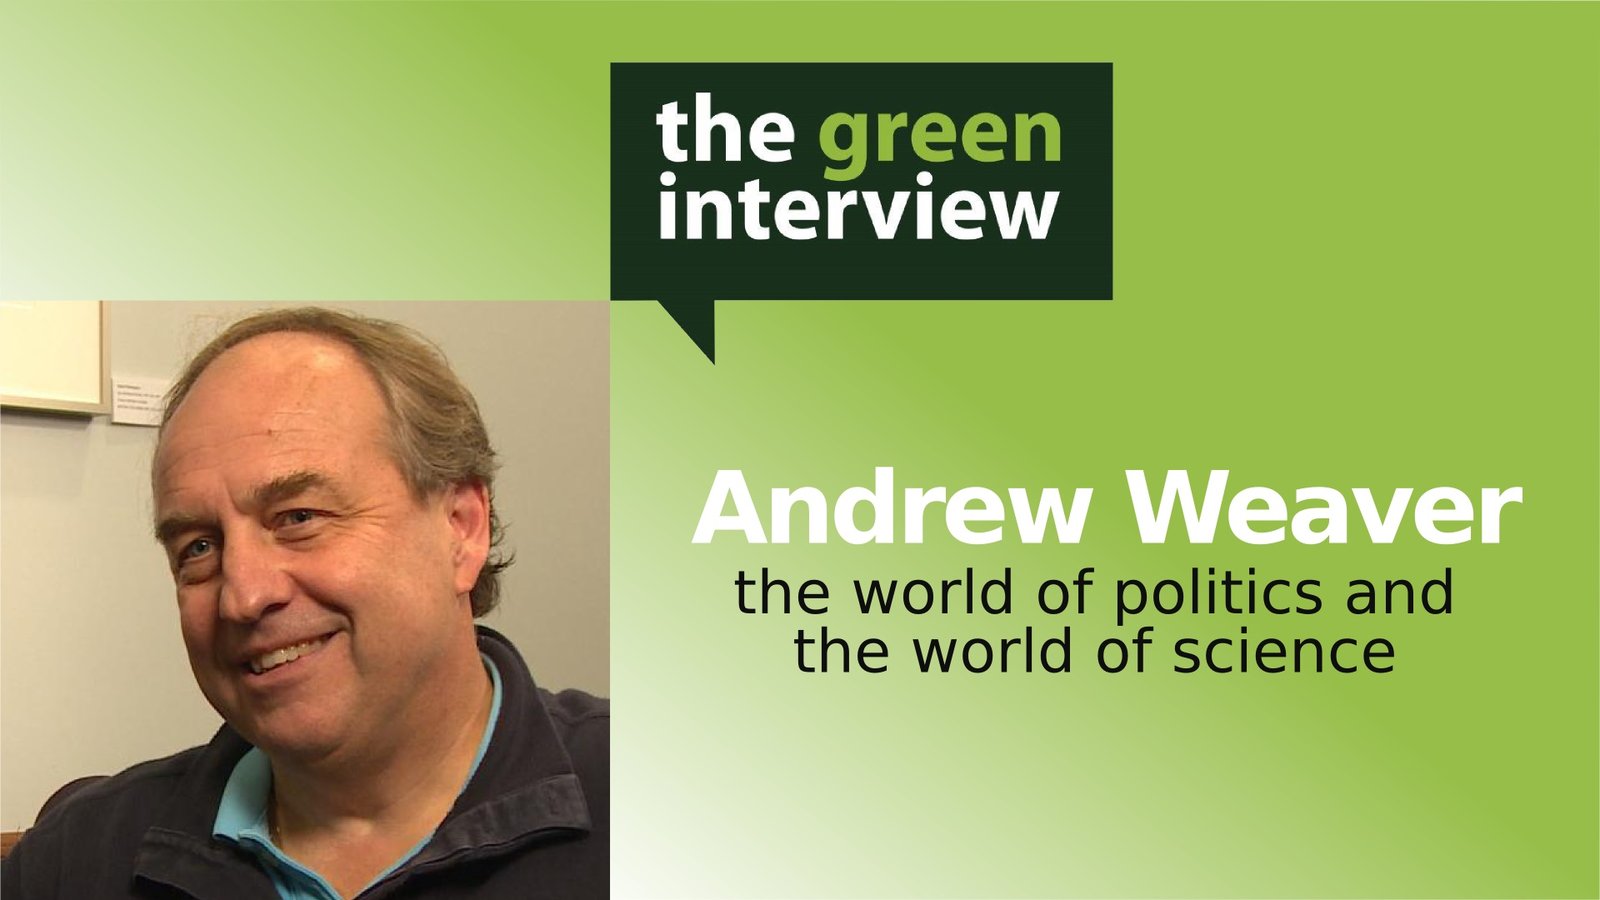 Andrew Weaver: The World of Politics and the World of Science